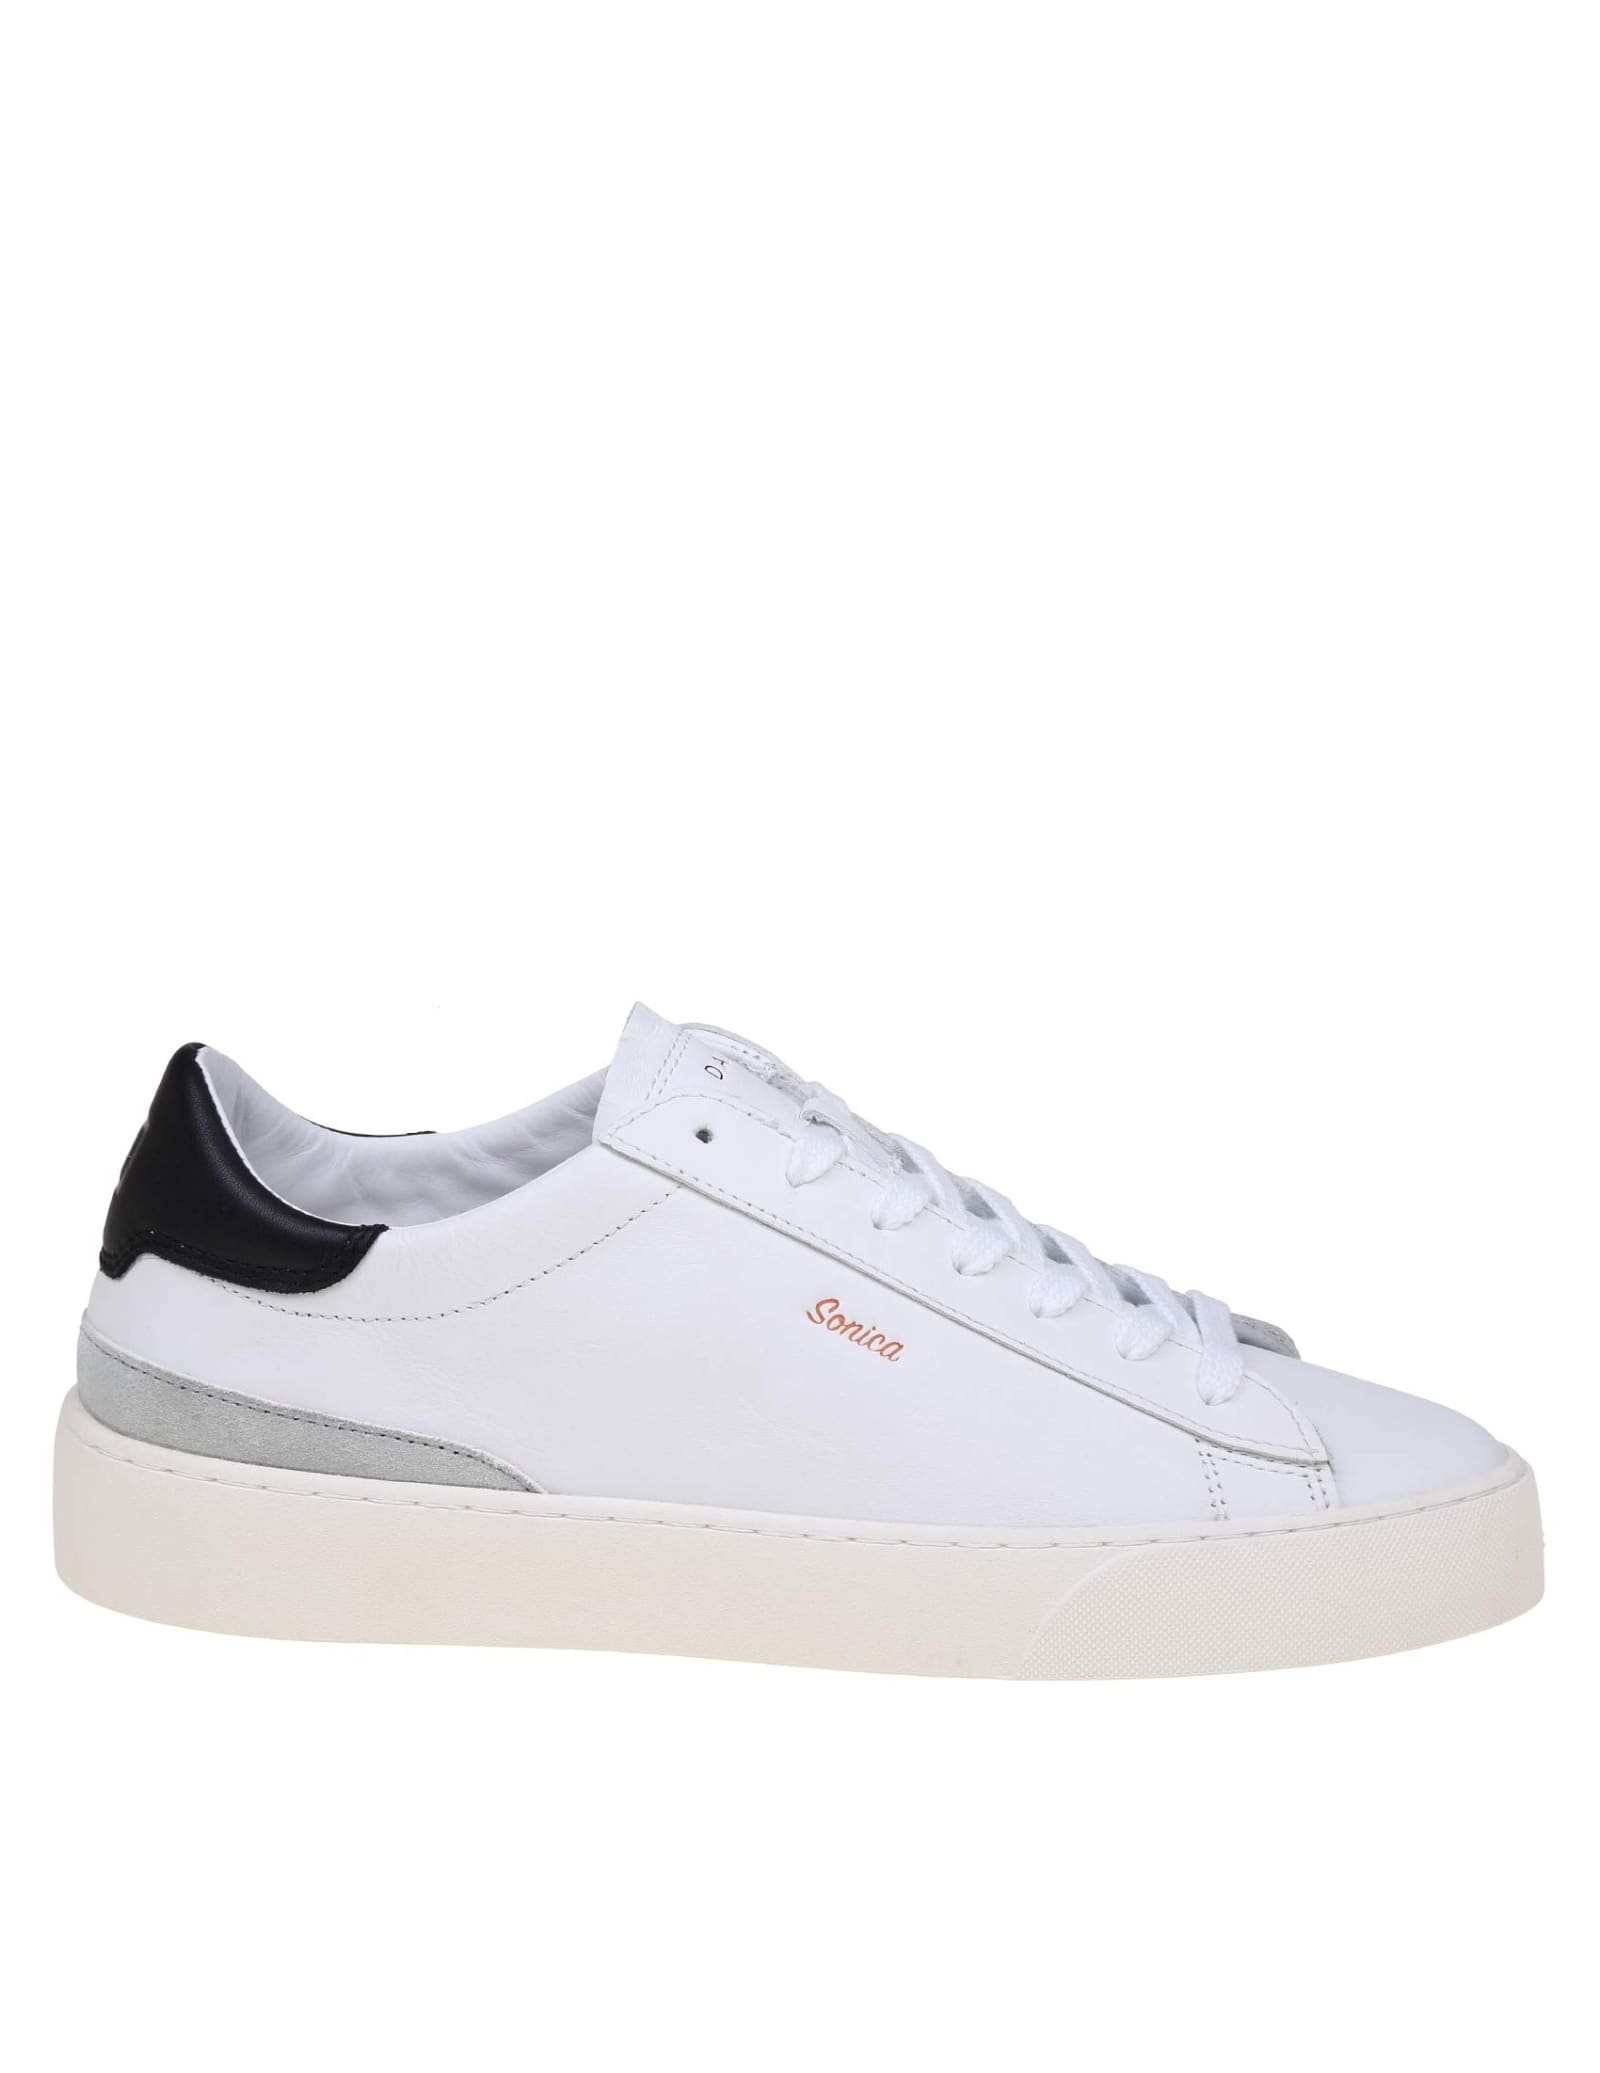 Shop Date Sonica Sneakers In White/black Leather